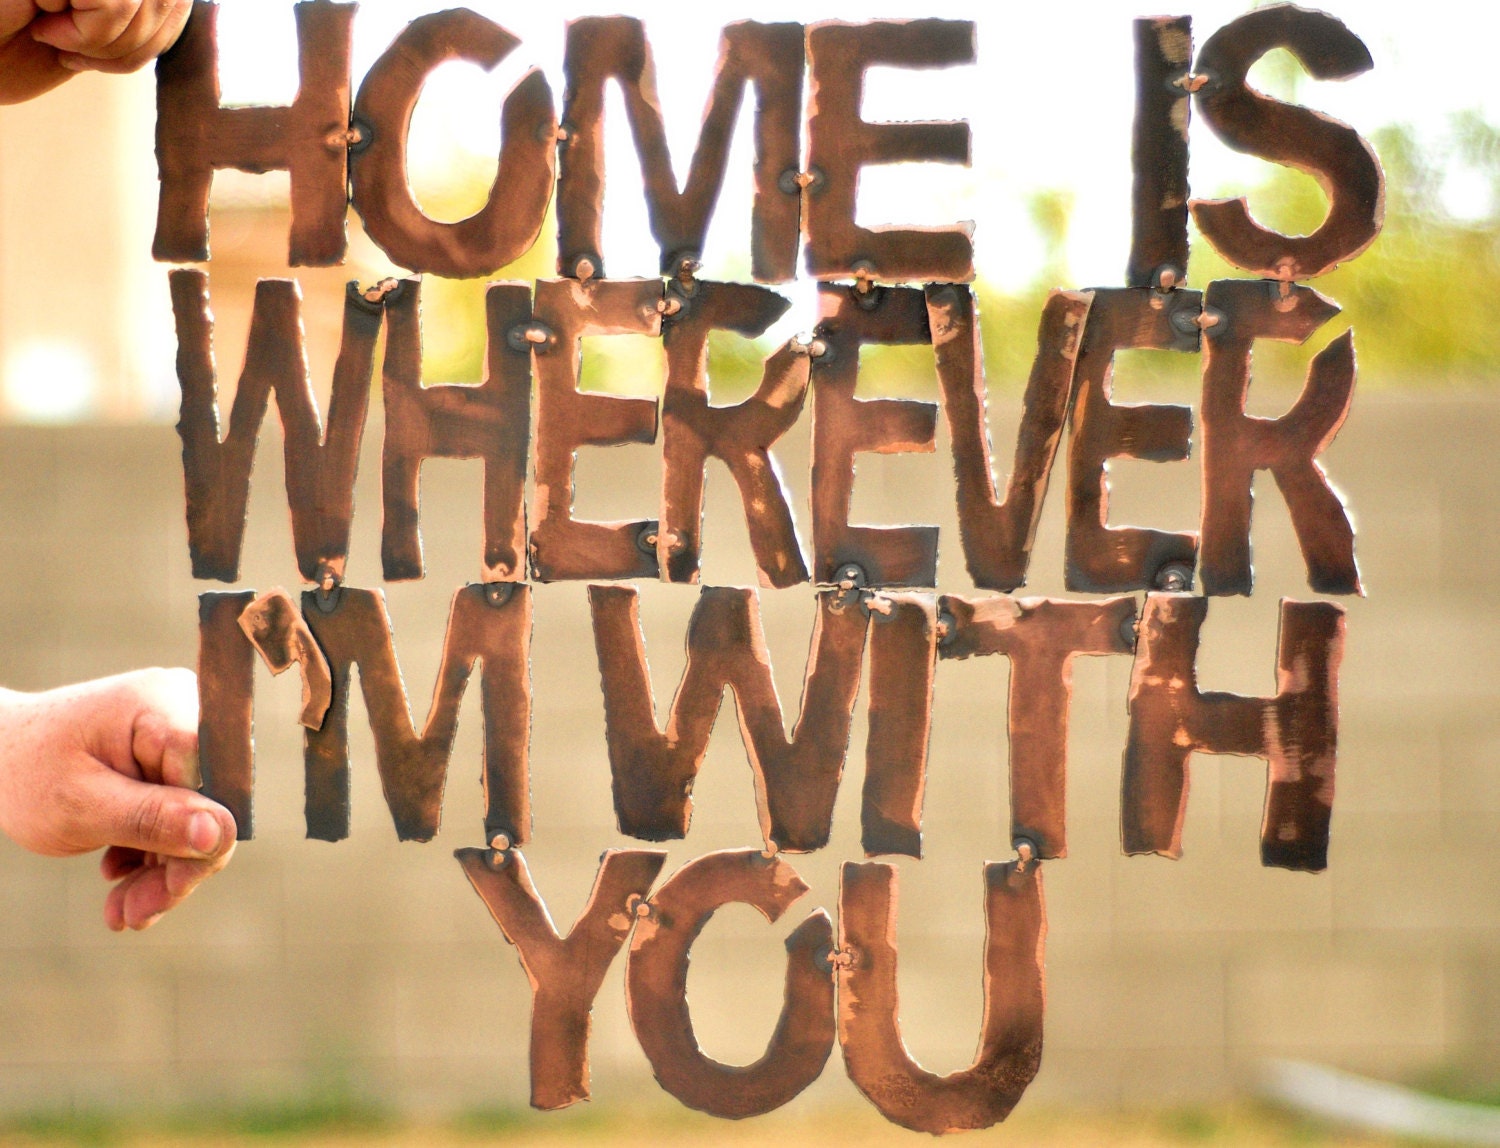 Home Is Wherever I'm With You, Travel, Rustic Art, Wall Phrases - GrizzlyCustomSteel